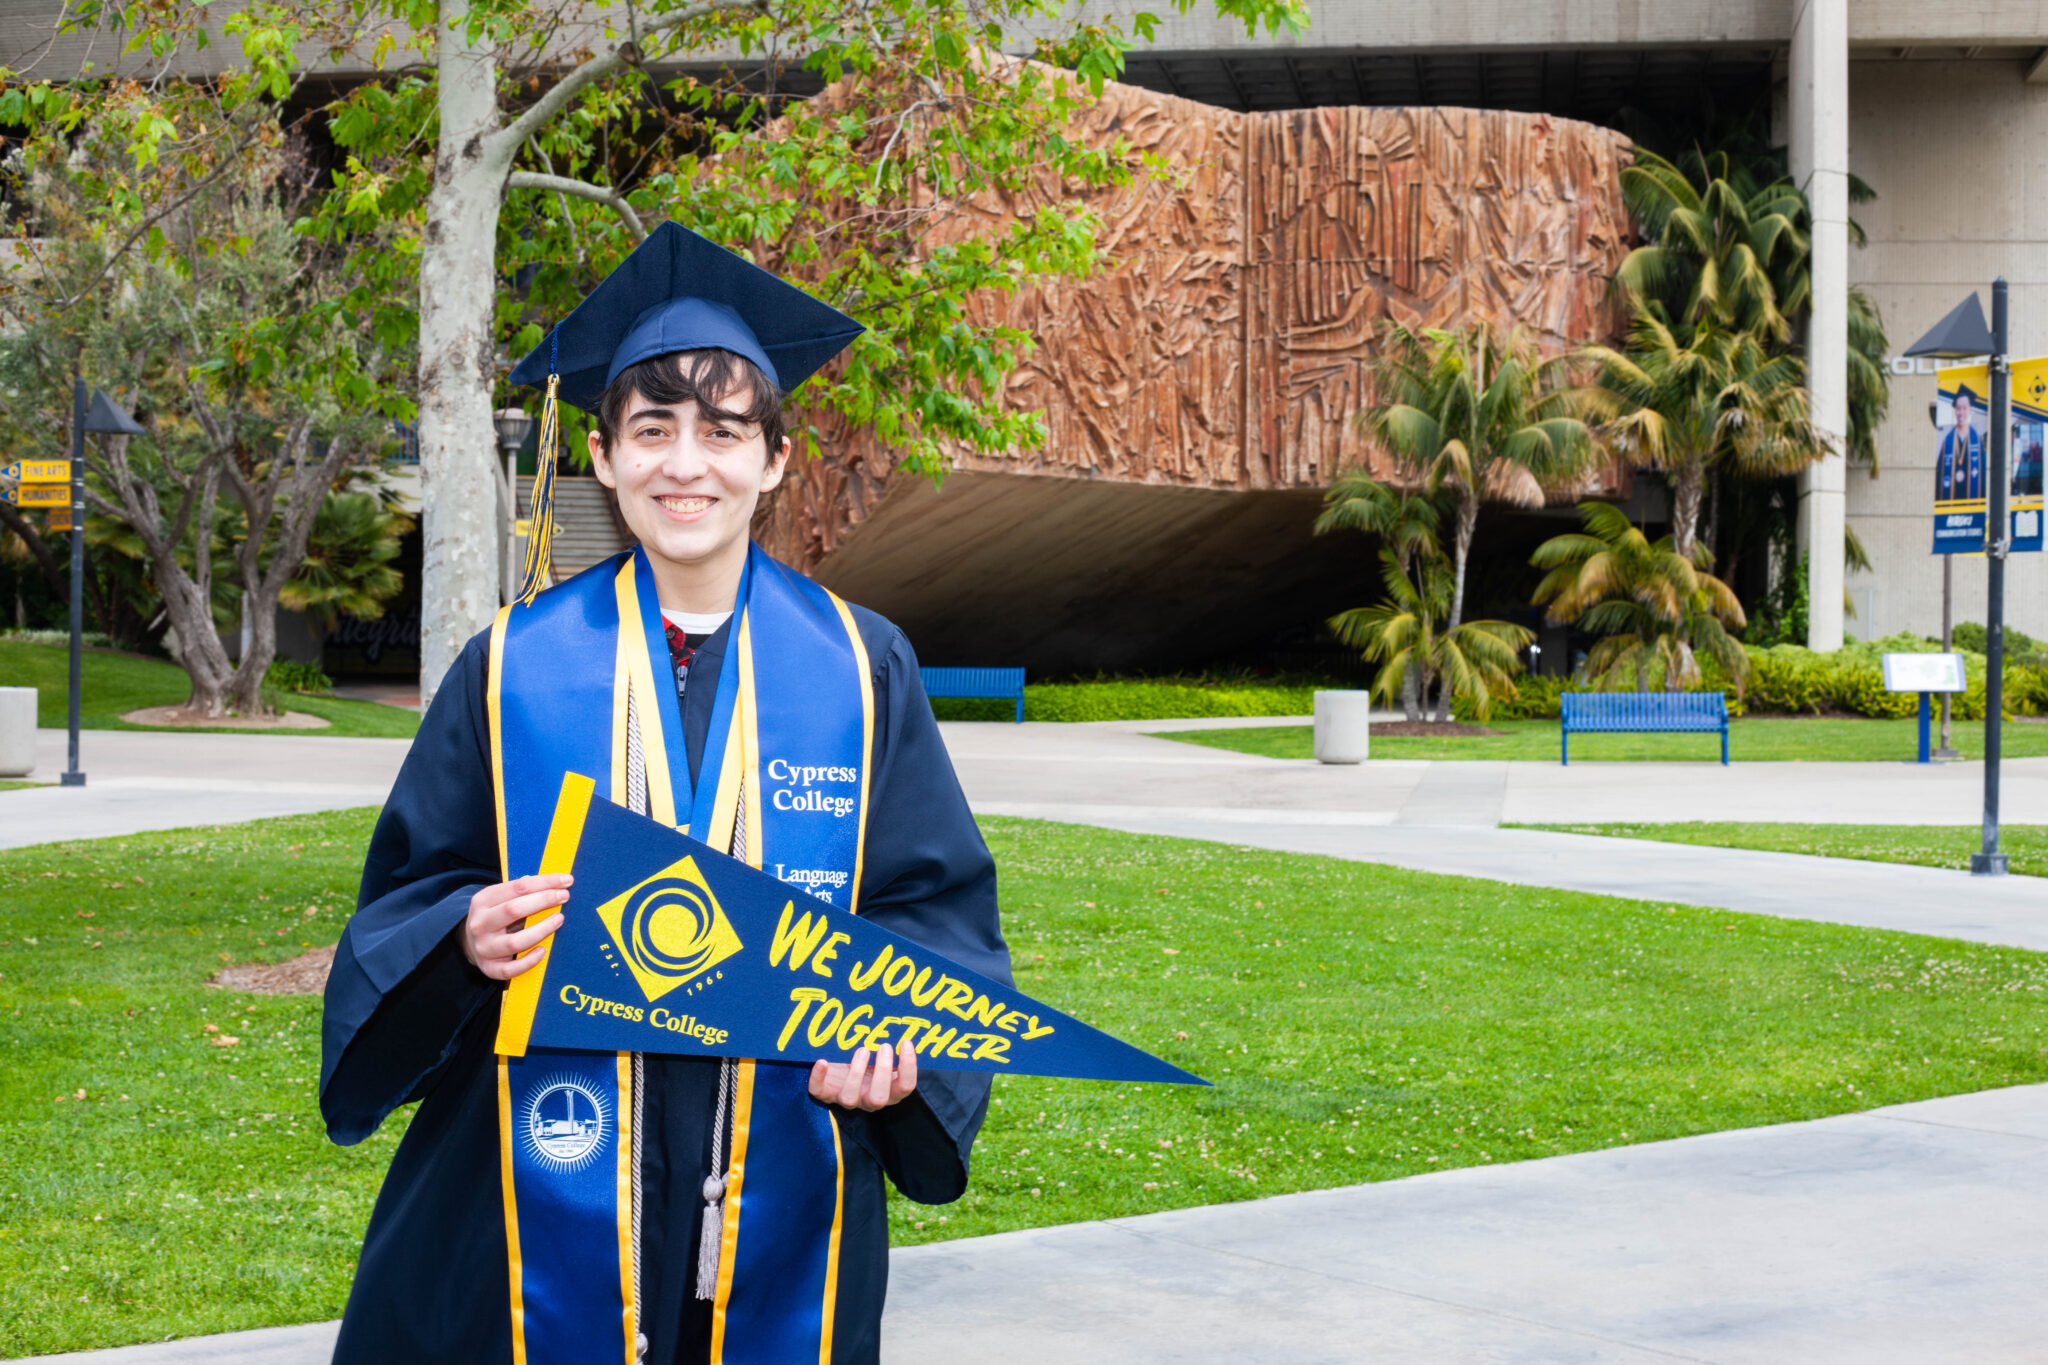 Portrait of Olly Tetrault, the 2023 Presidential Scholar of Distinction for the Language Arts pathway, wearing regalia and holding a Cypress College "We Journey Together" pennant with CCCPLX and the Sergio O'Cadiz sculpture in the background.